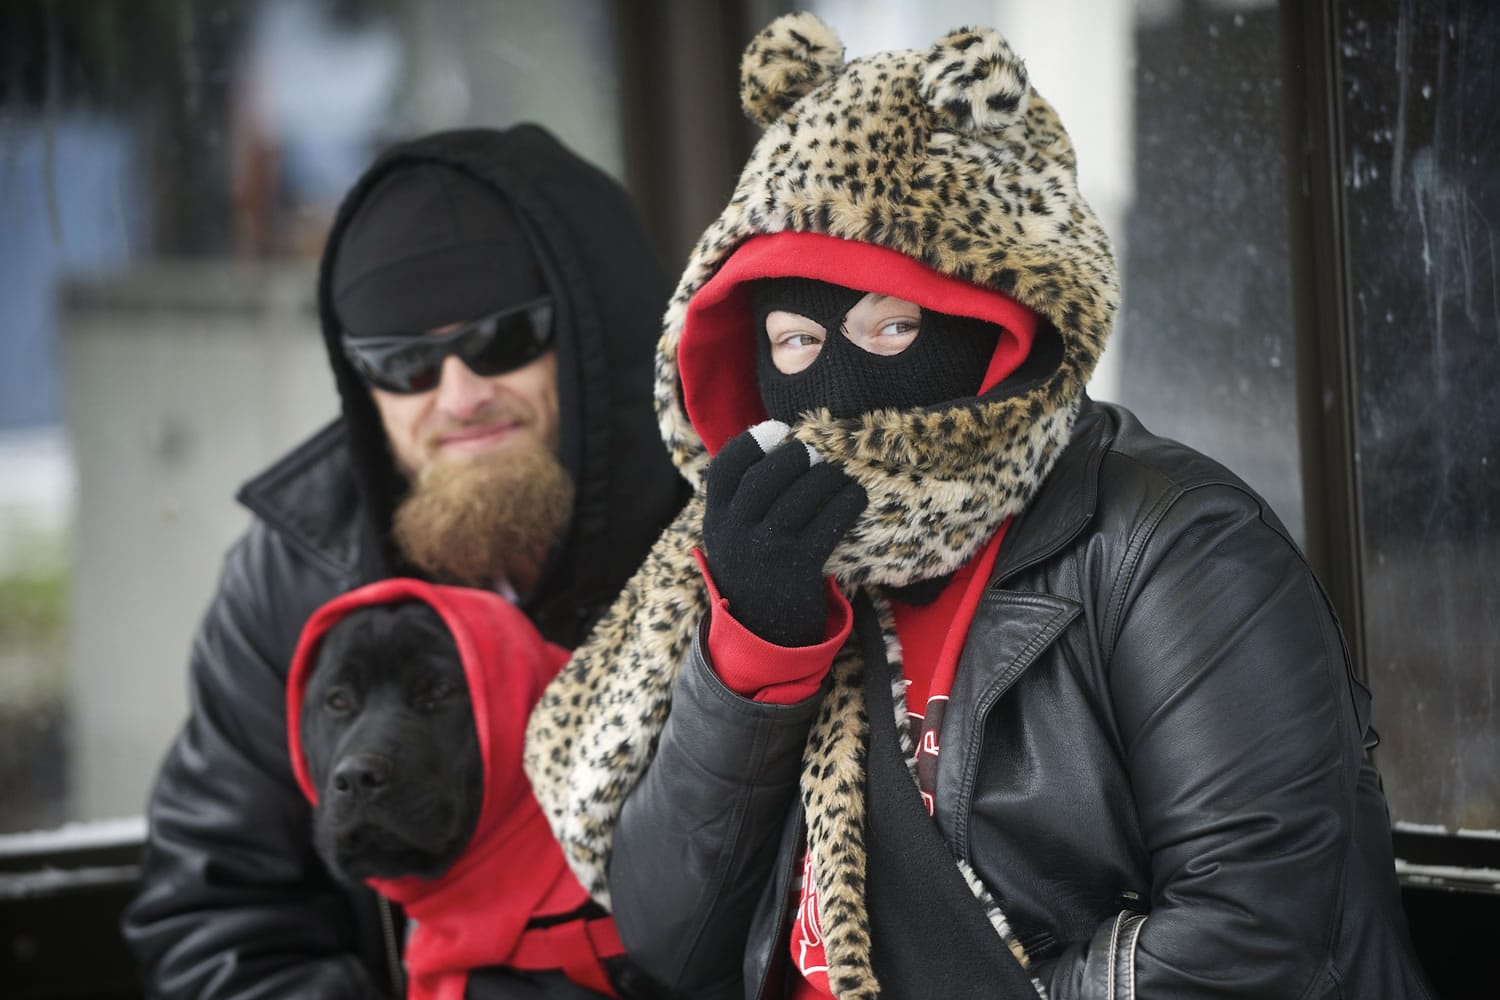 Trisha Pogue, right, covers her face from the cold while waiting for a city bus with Joshua Romine, left, and their dog Leah Friday morning in Vancouver.